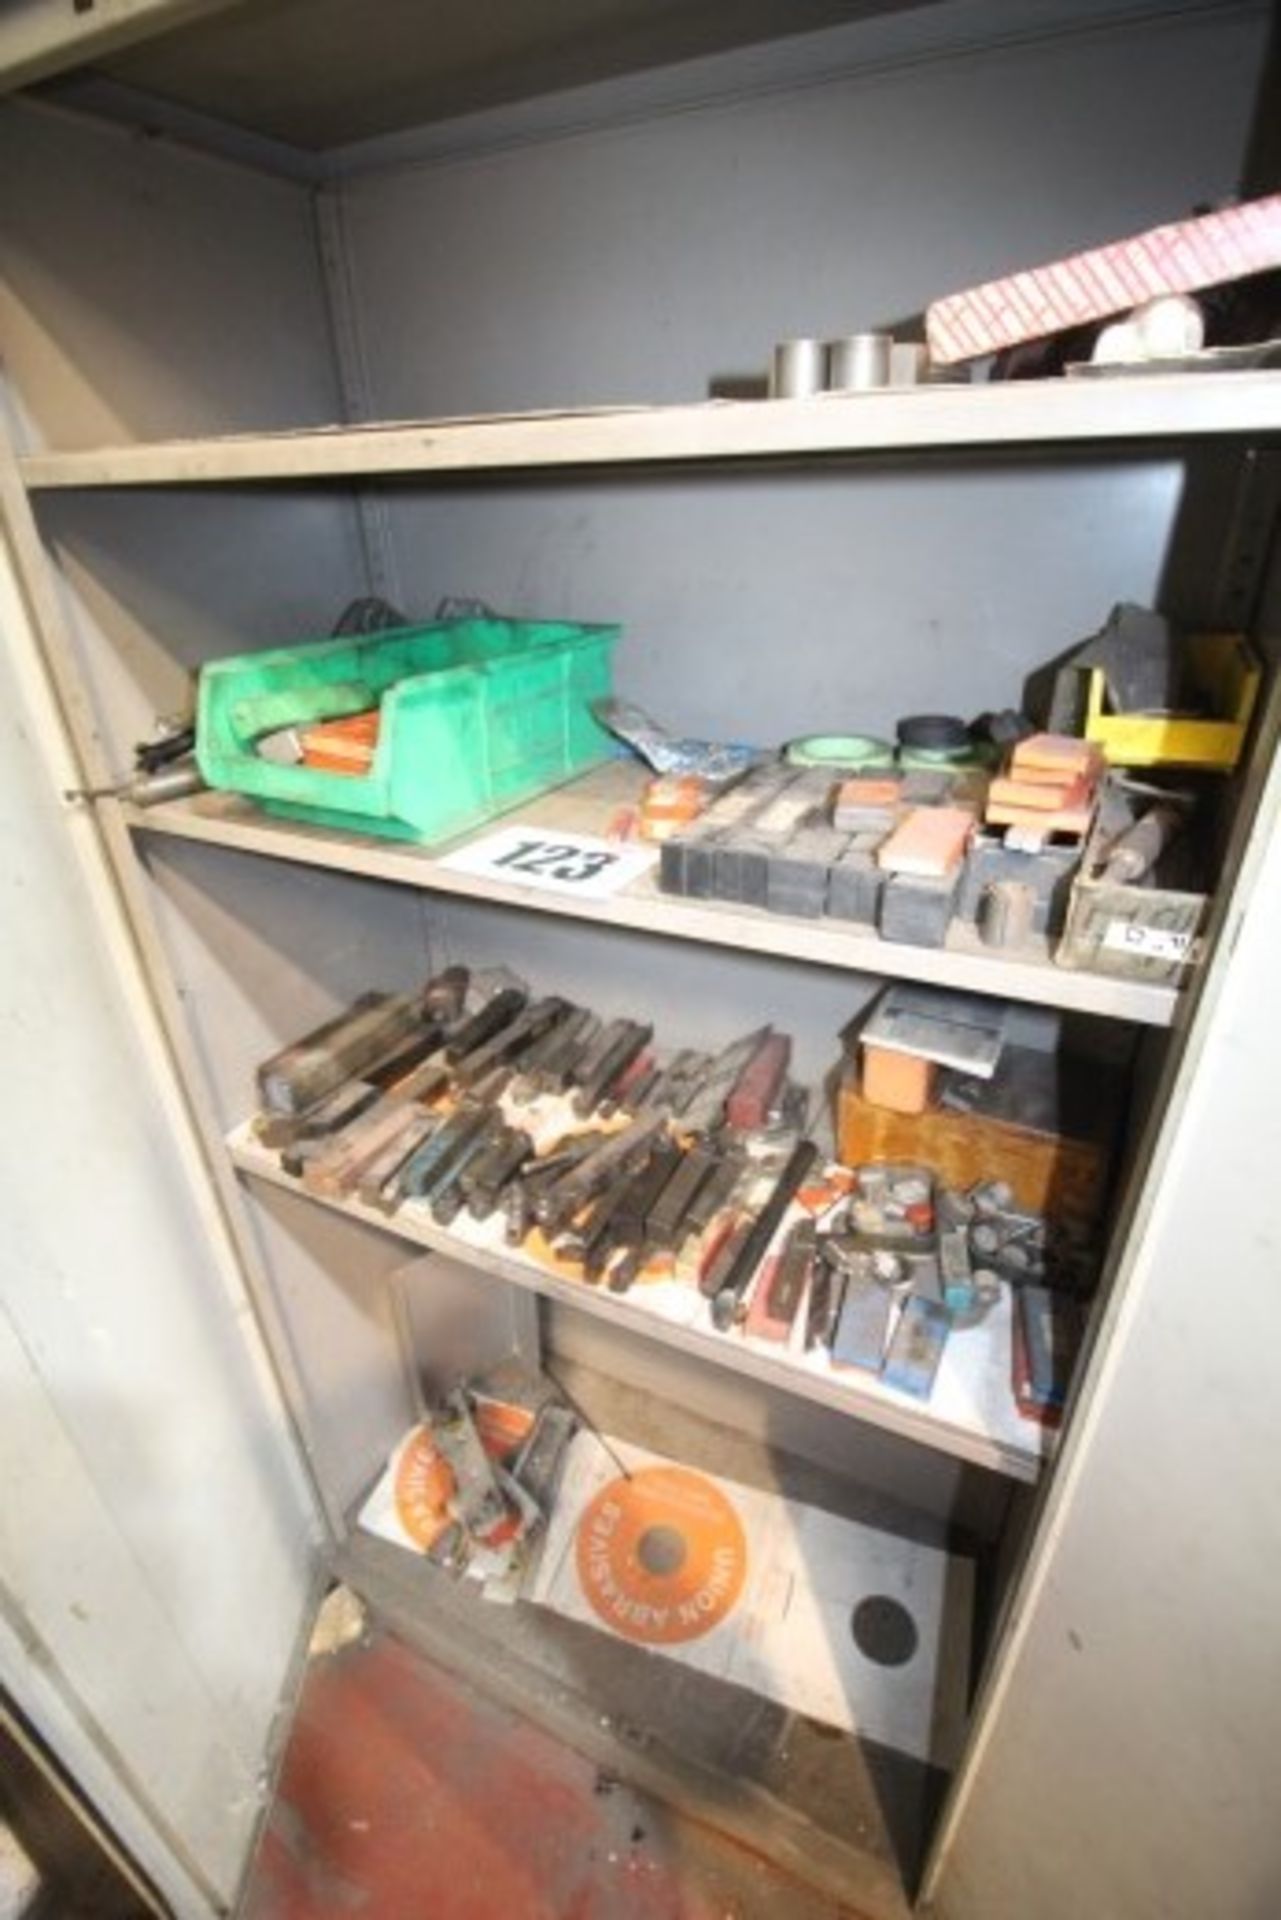 CONTENTS OF RACK OF VARIOUS LATHE CUTTING TOOLS & LATHE TIPS